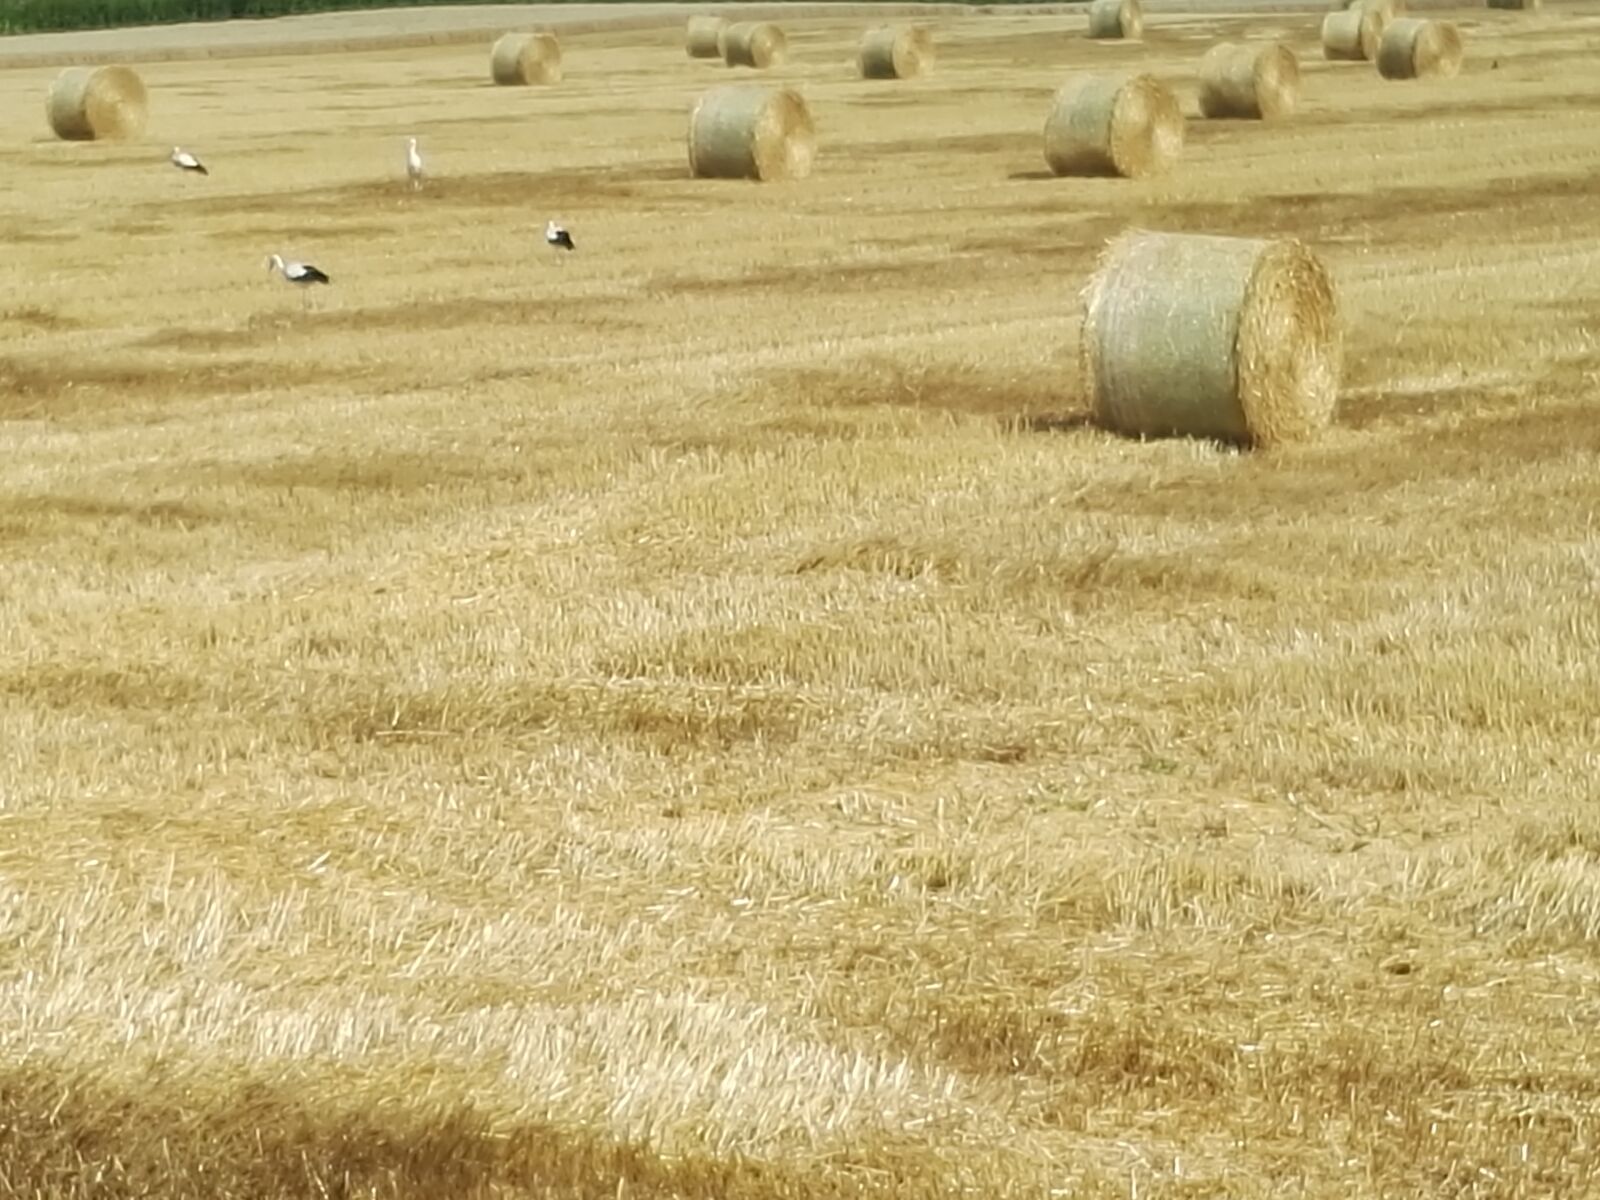 HUAWEI P8 sample photo. Storks, field, wheat photography